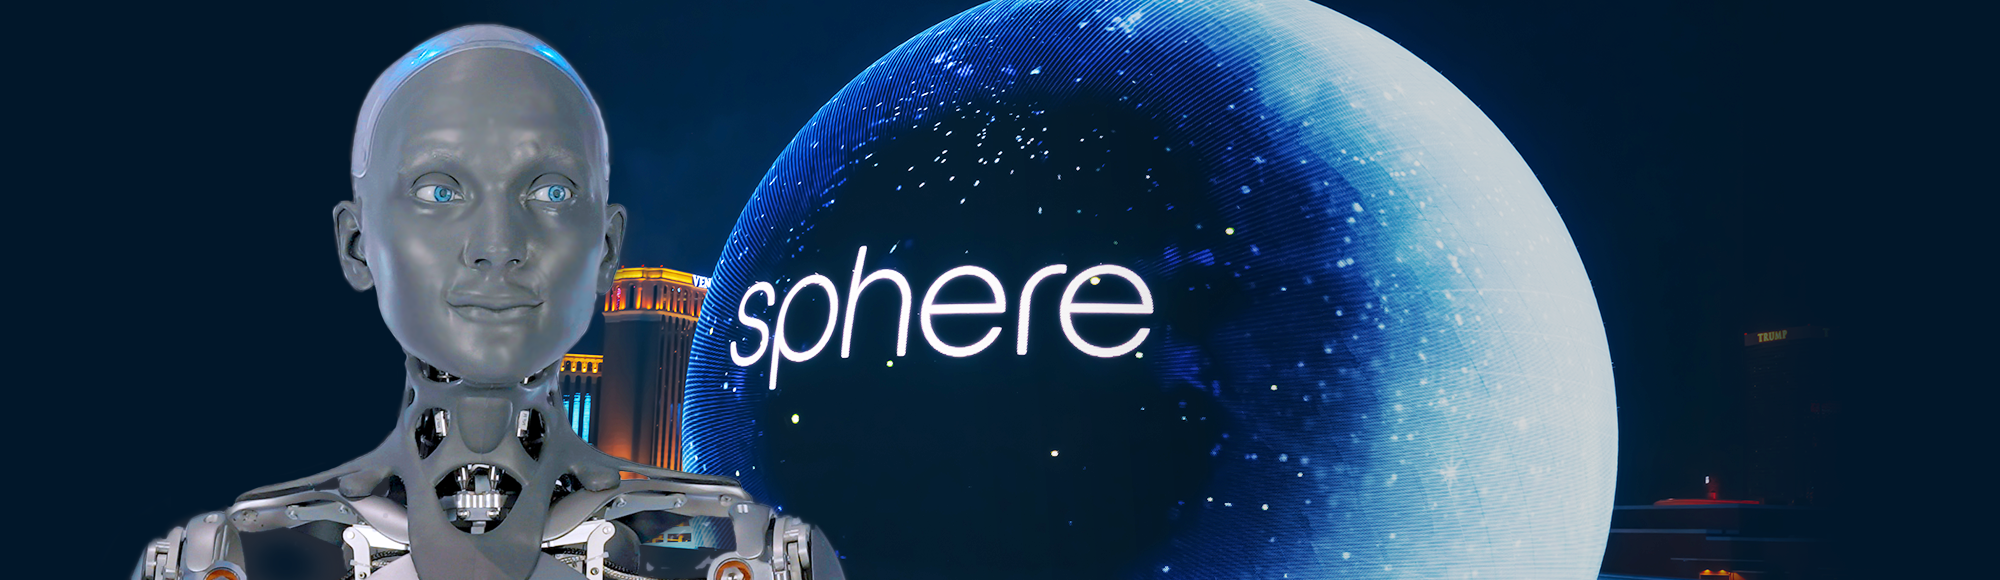 The Sphere Experience show